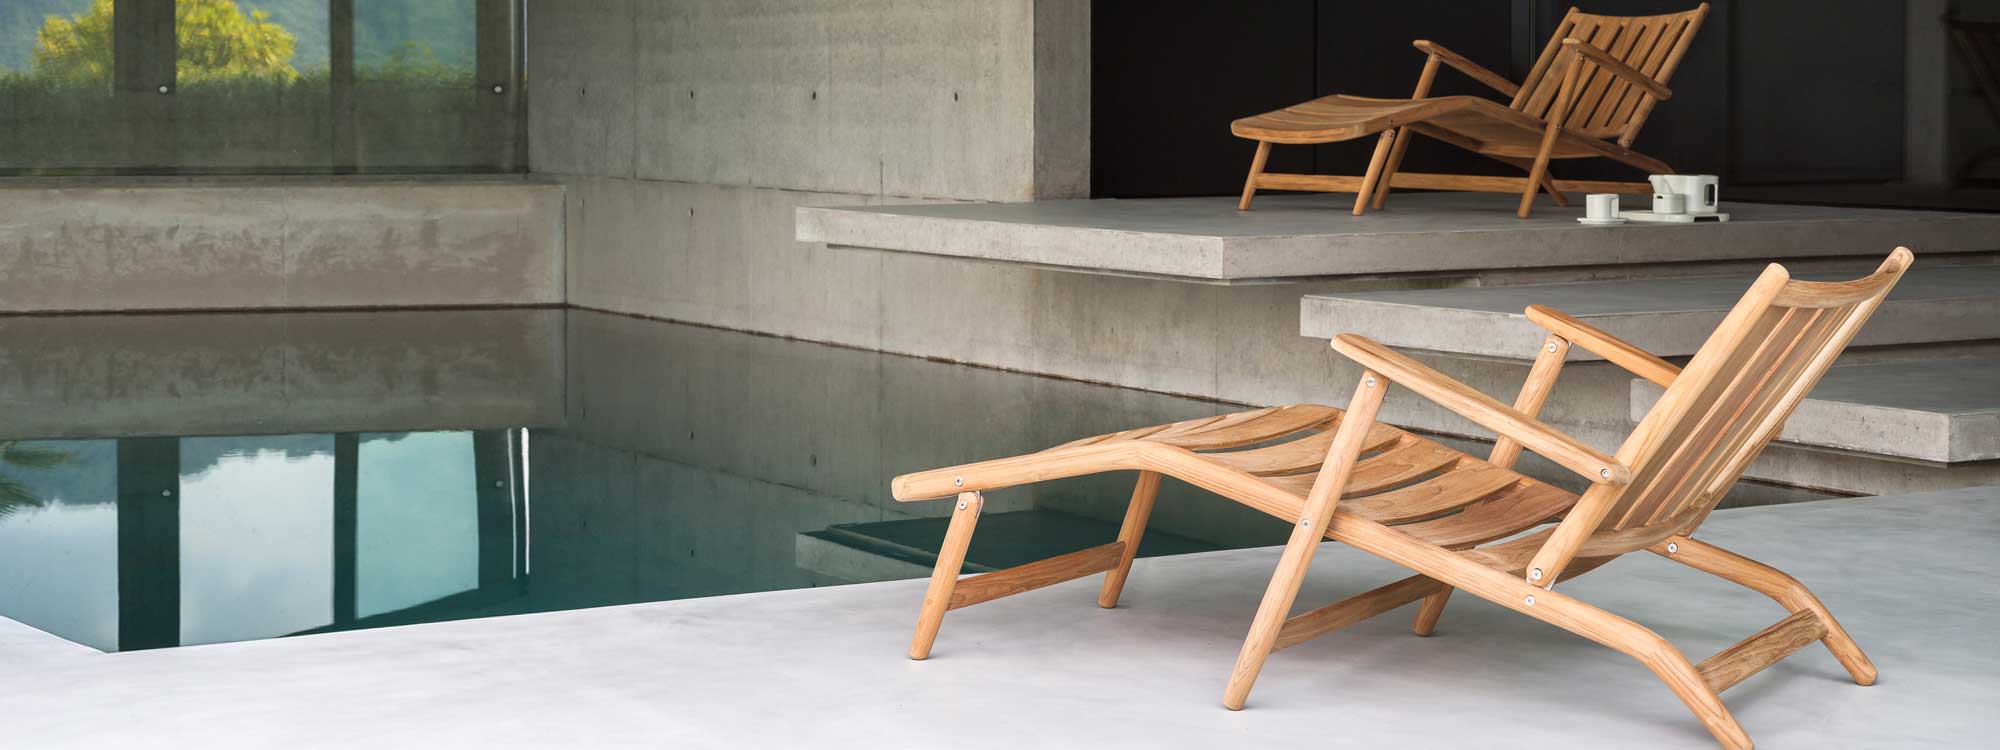 Image of pair of RODA Levante modern teak steamer chairs on minimalist poured concrete poolside